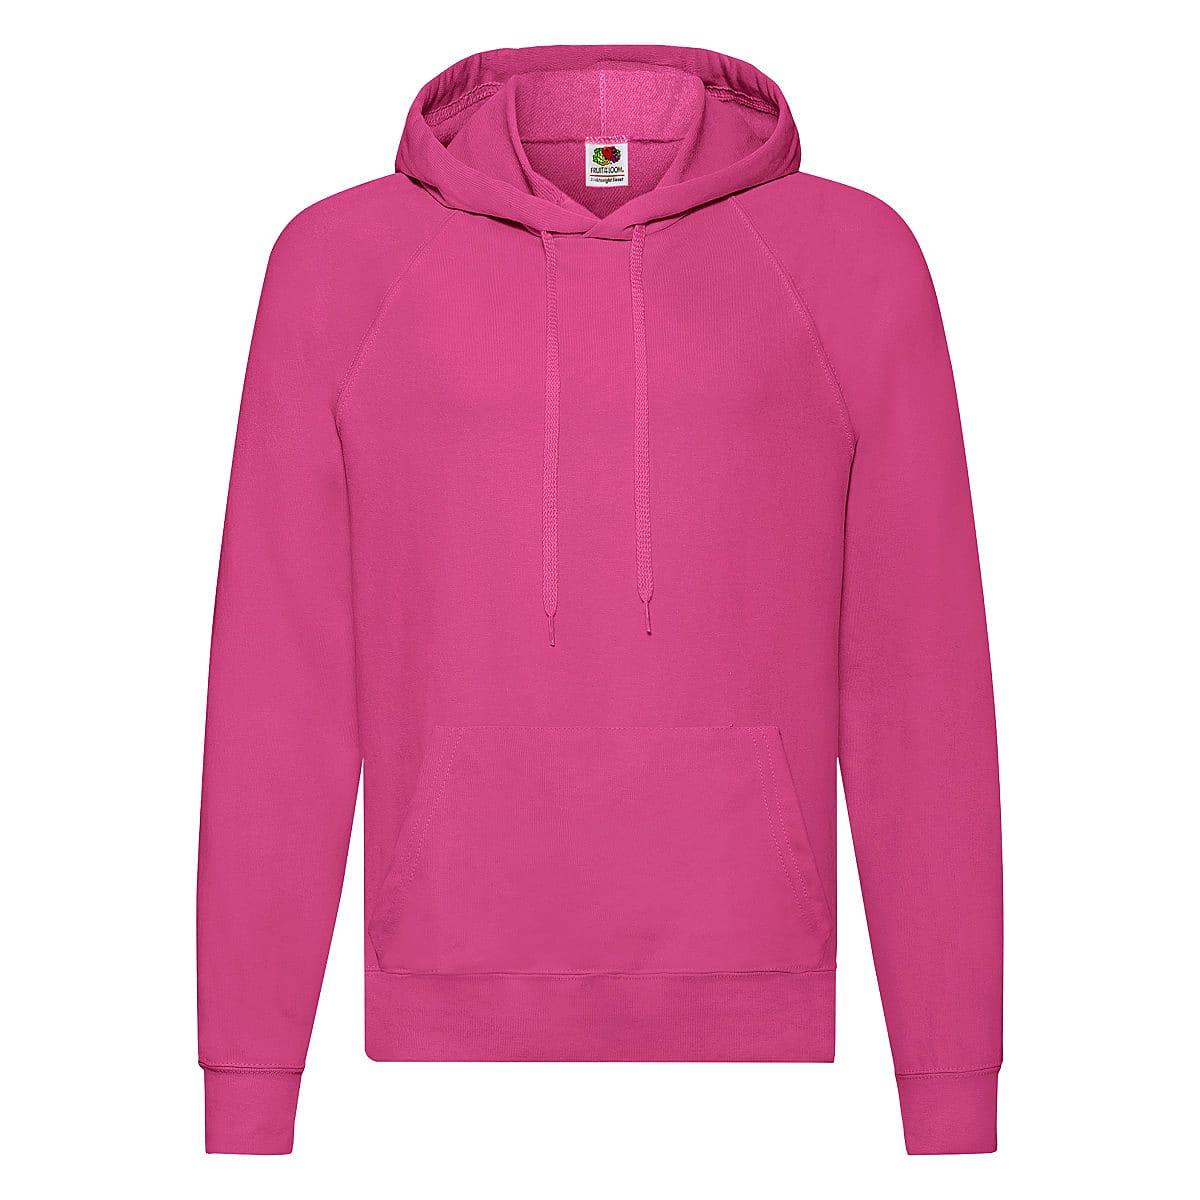 Fruit Of The Loom Mens Lightweight Hoodie in Fuchsia (Product Code: 62140)